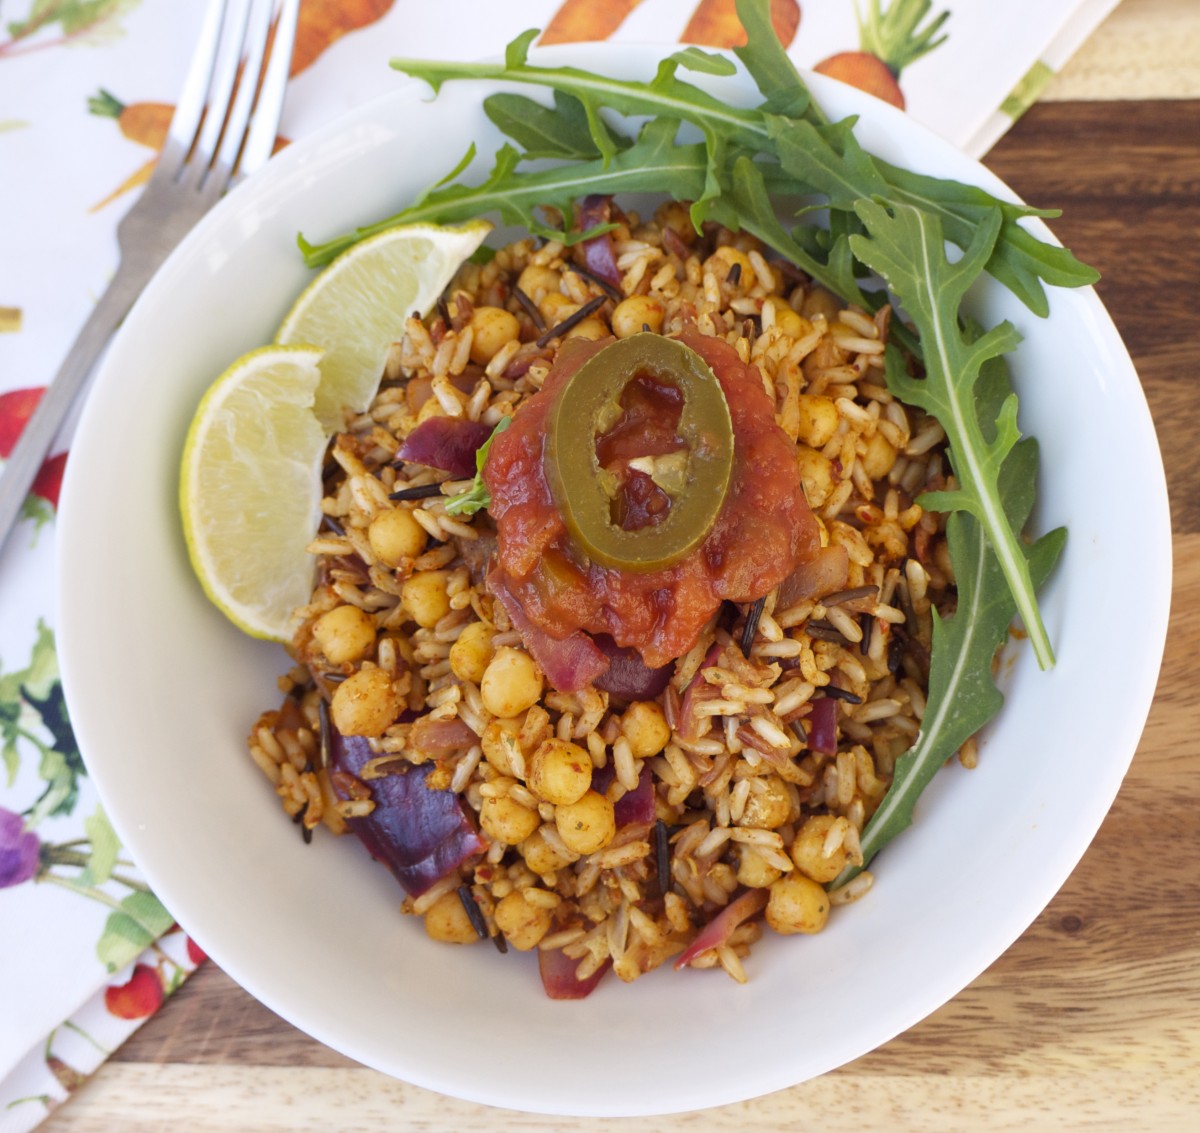 Curried Chickpea and Wild Rice Stir-fry